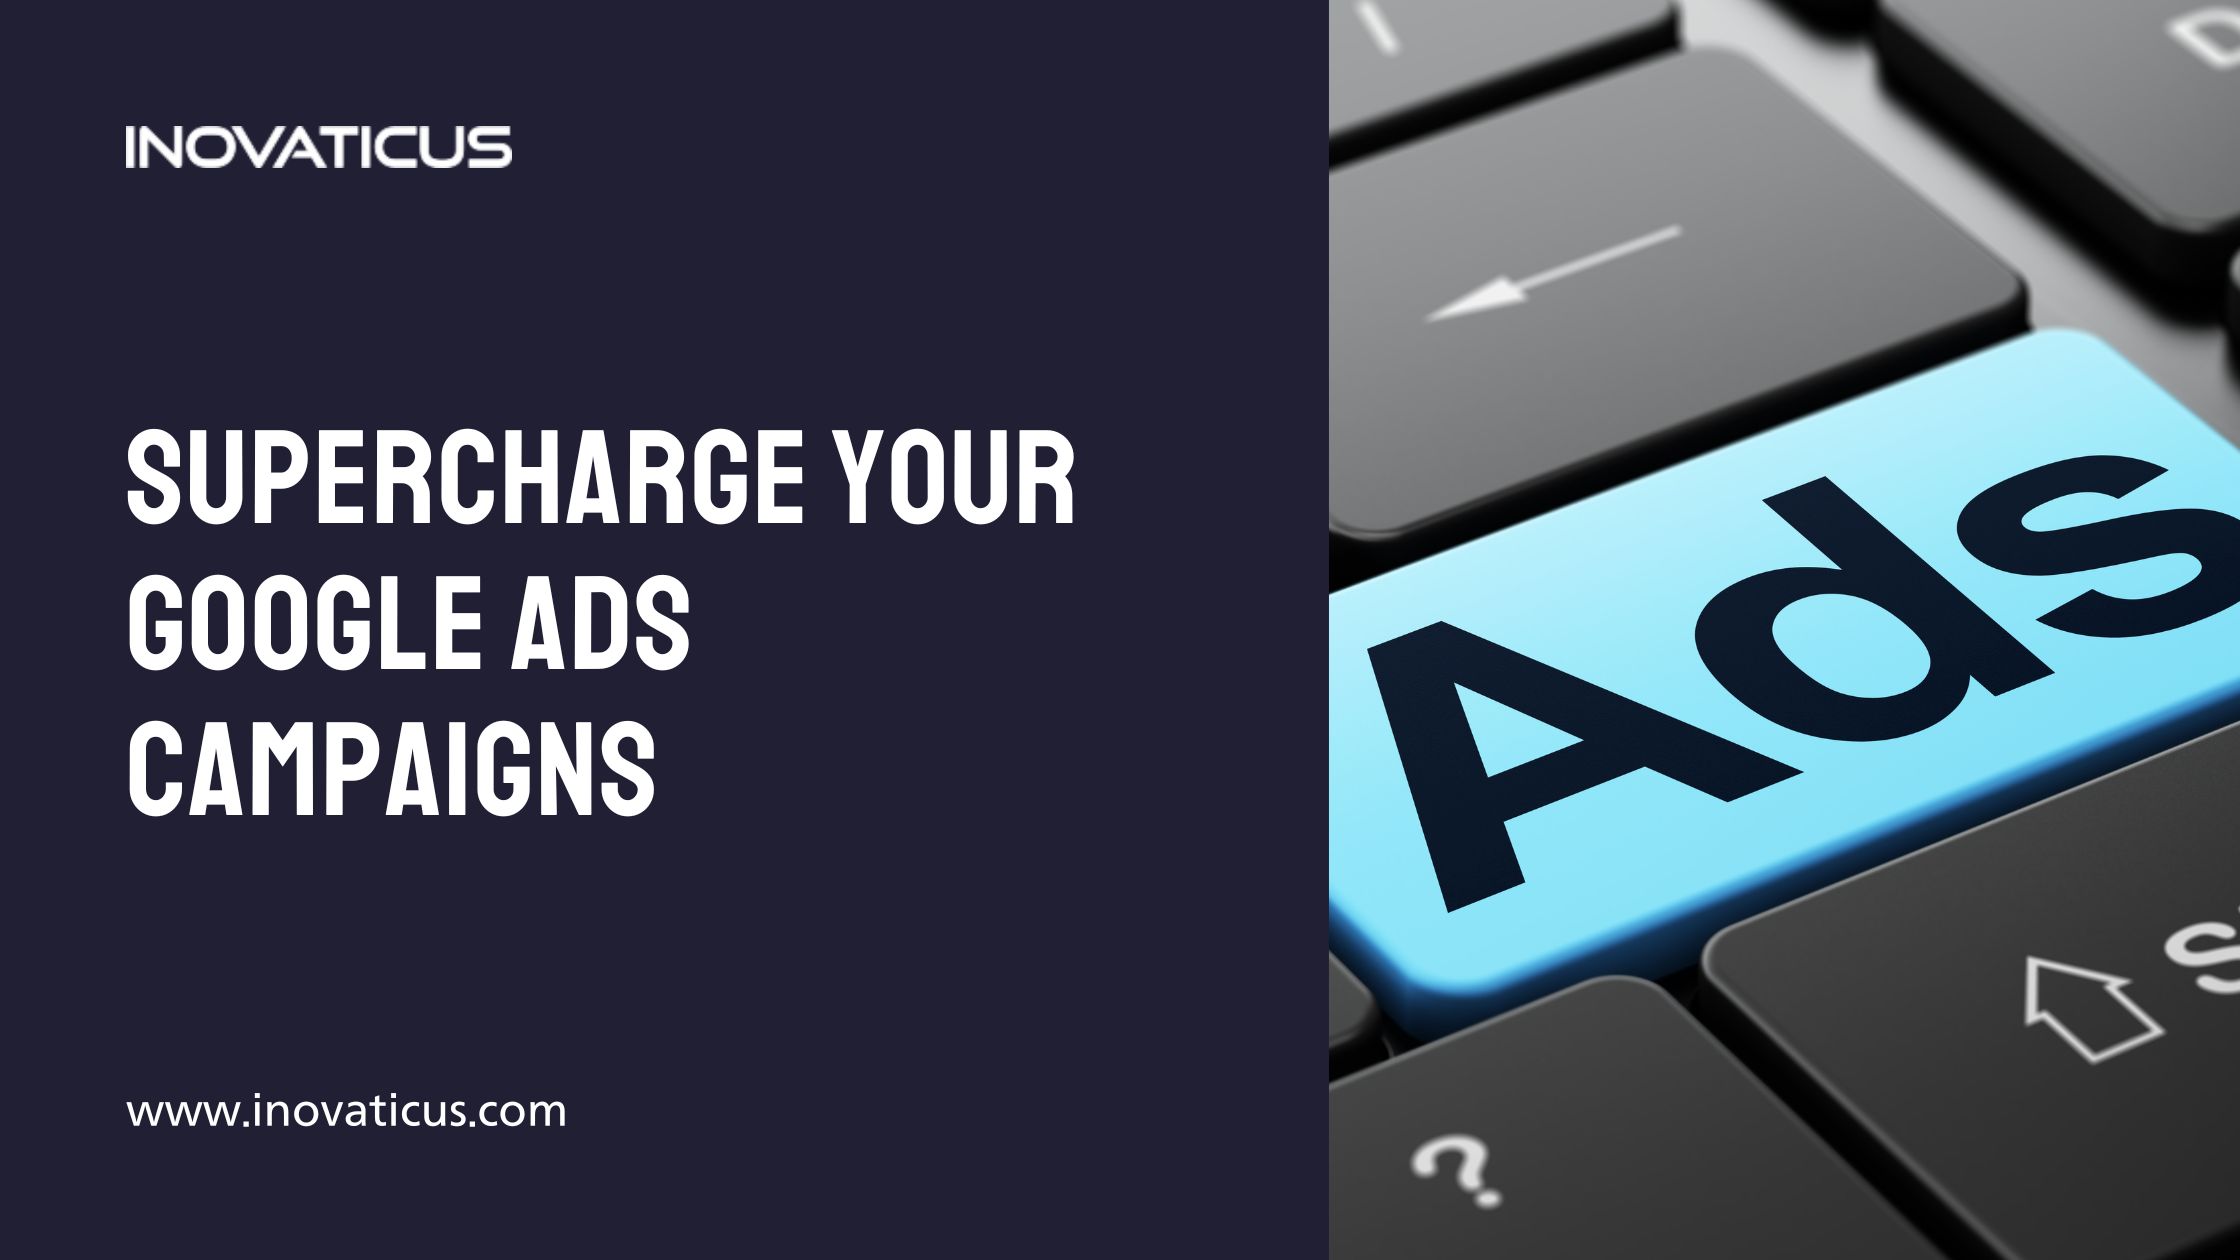 Supercharge Your Google Ads Campaigns